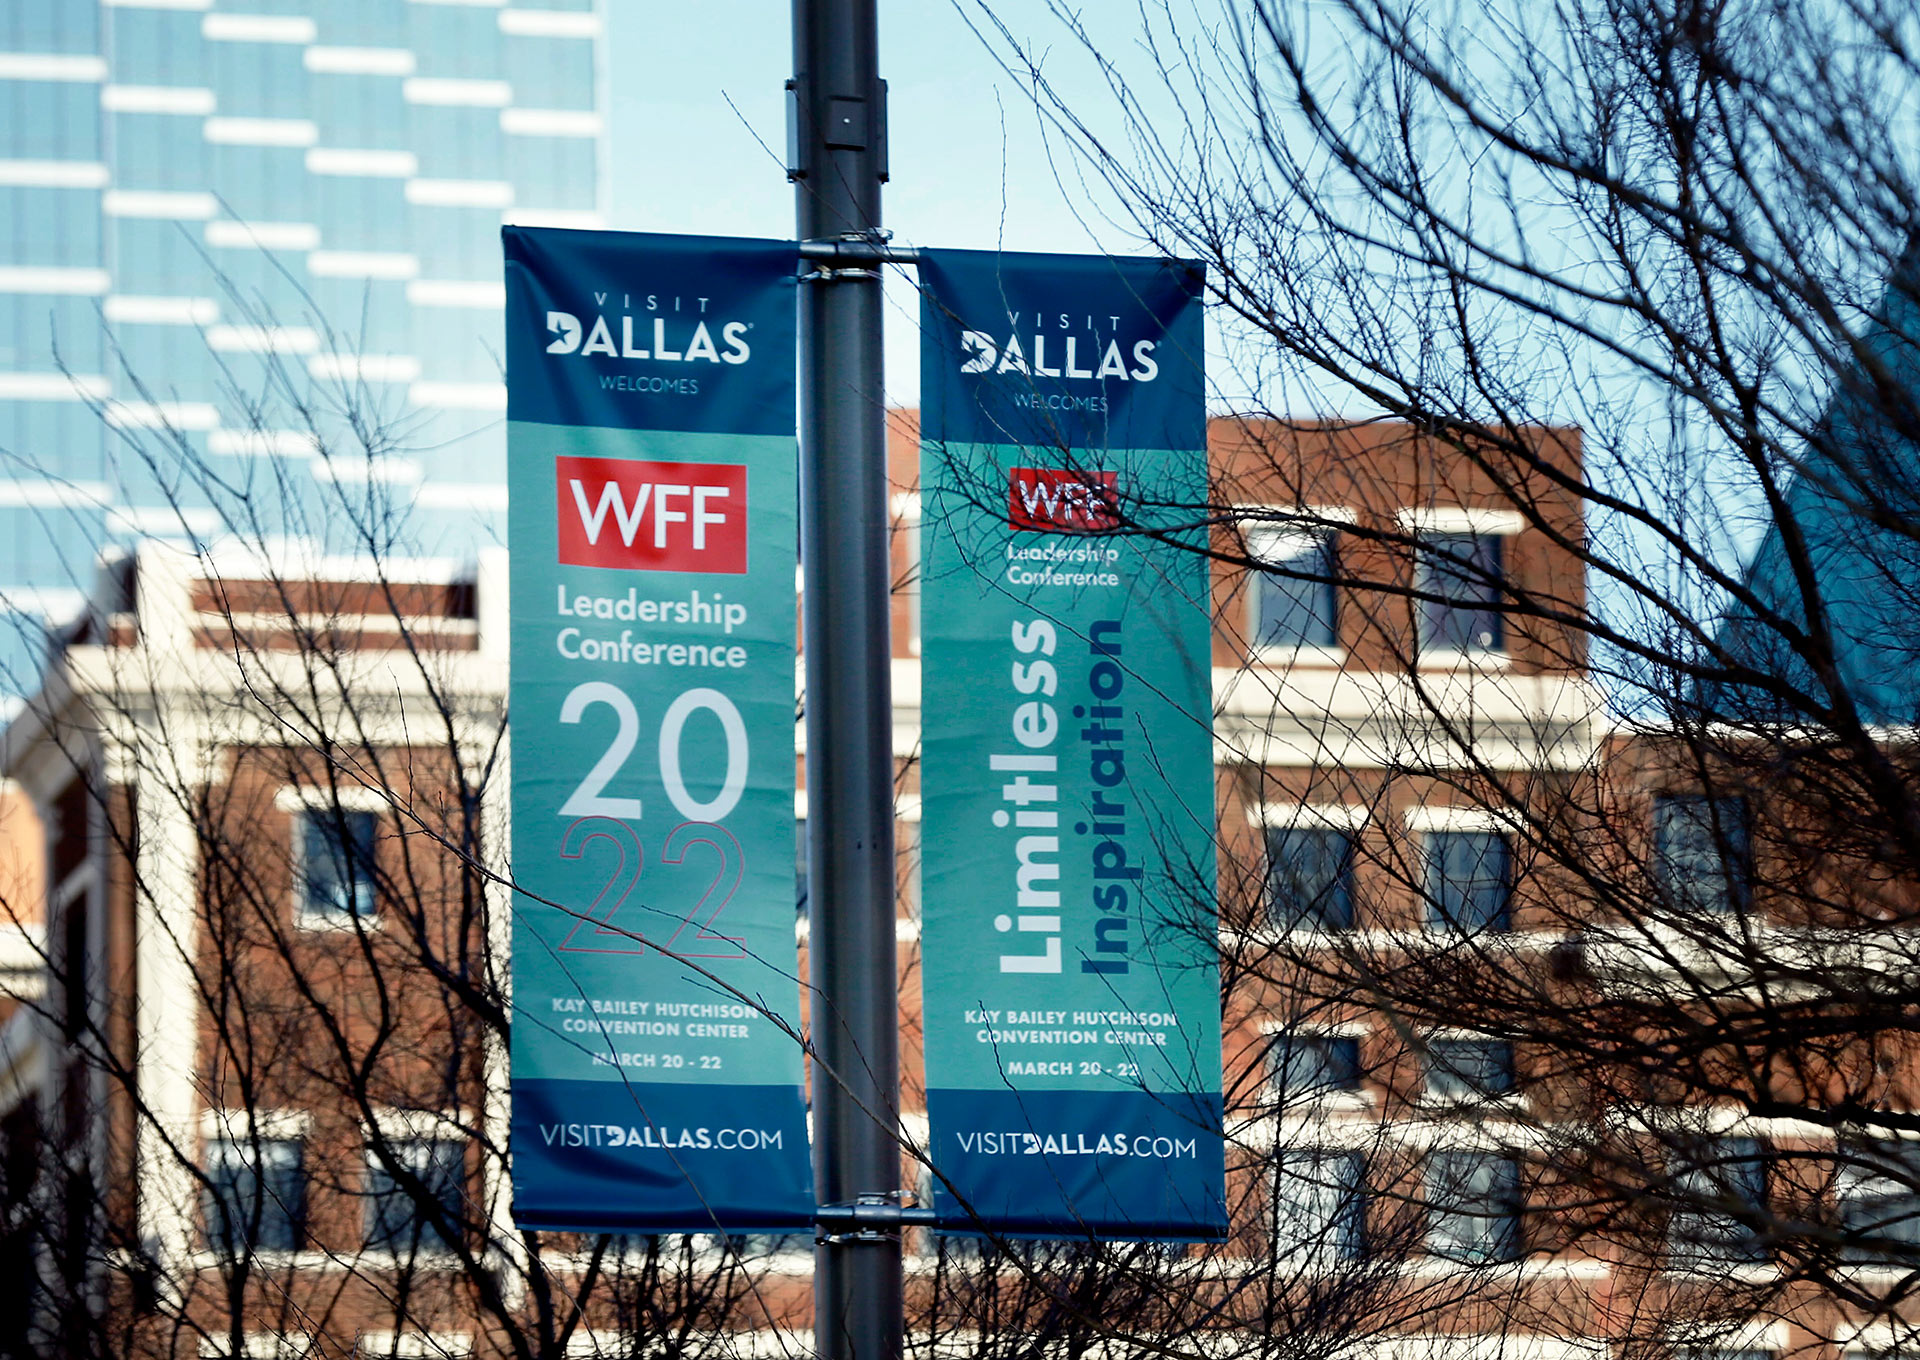 wff-leadership-conference-c-street-banners